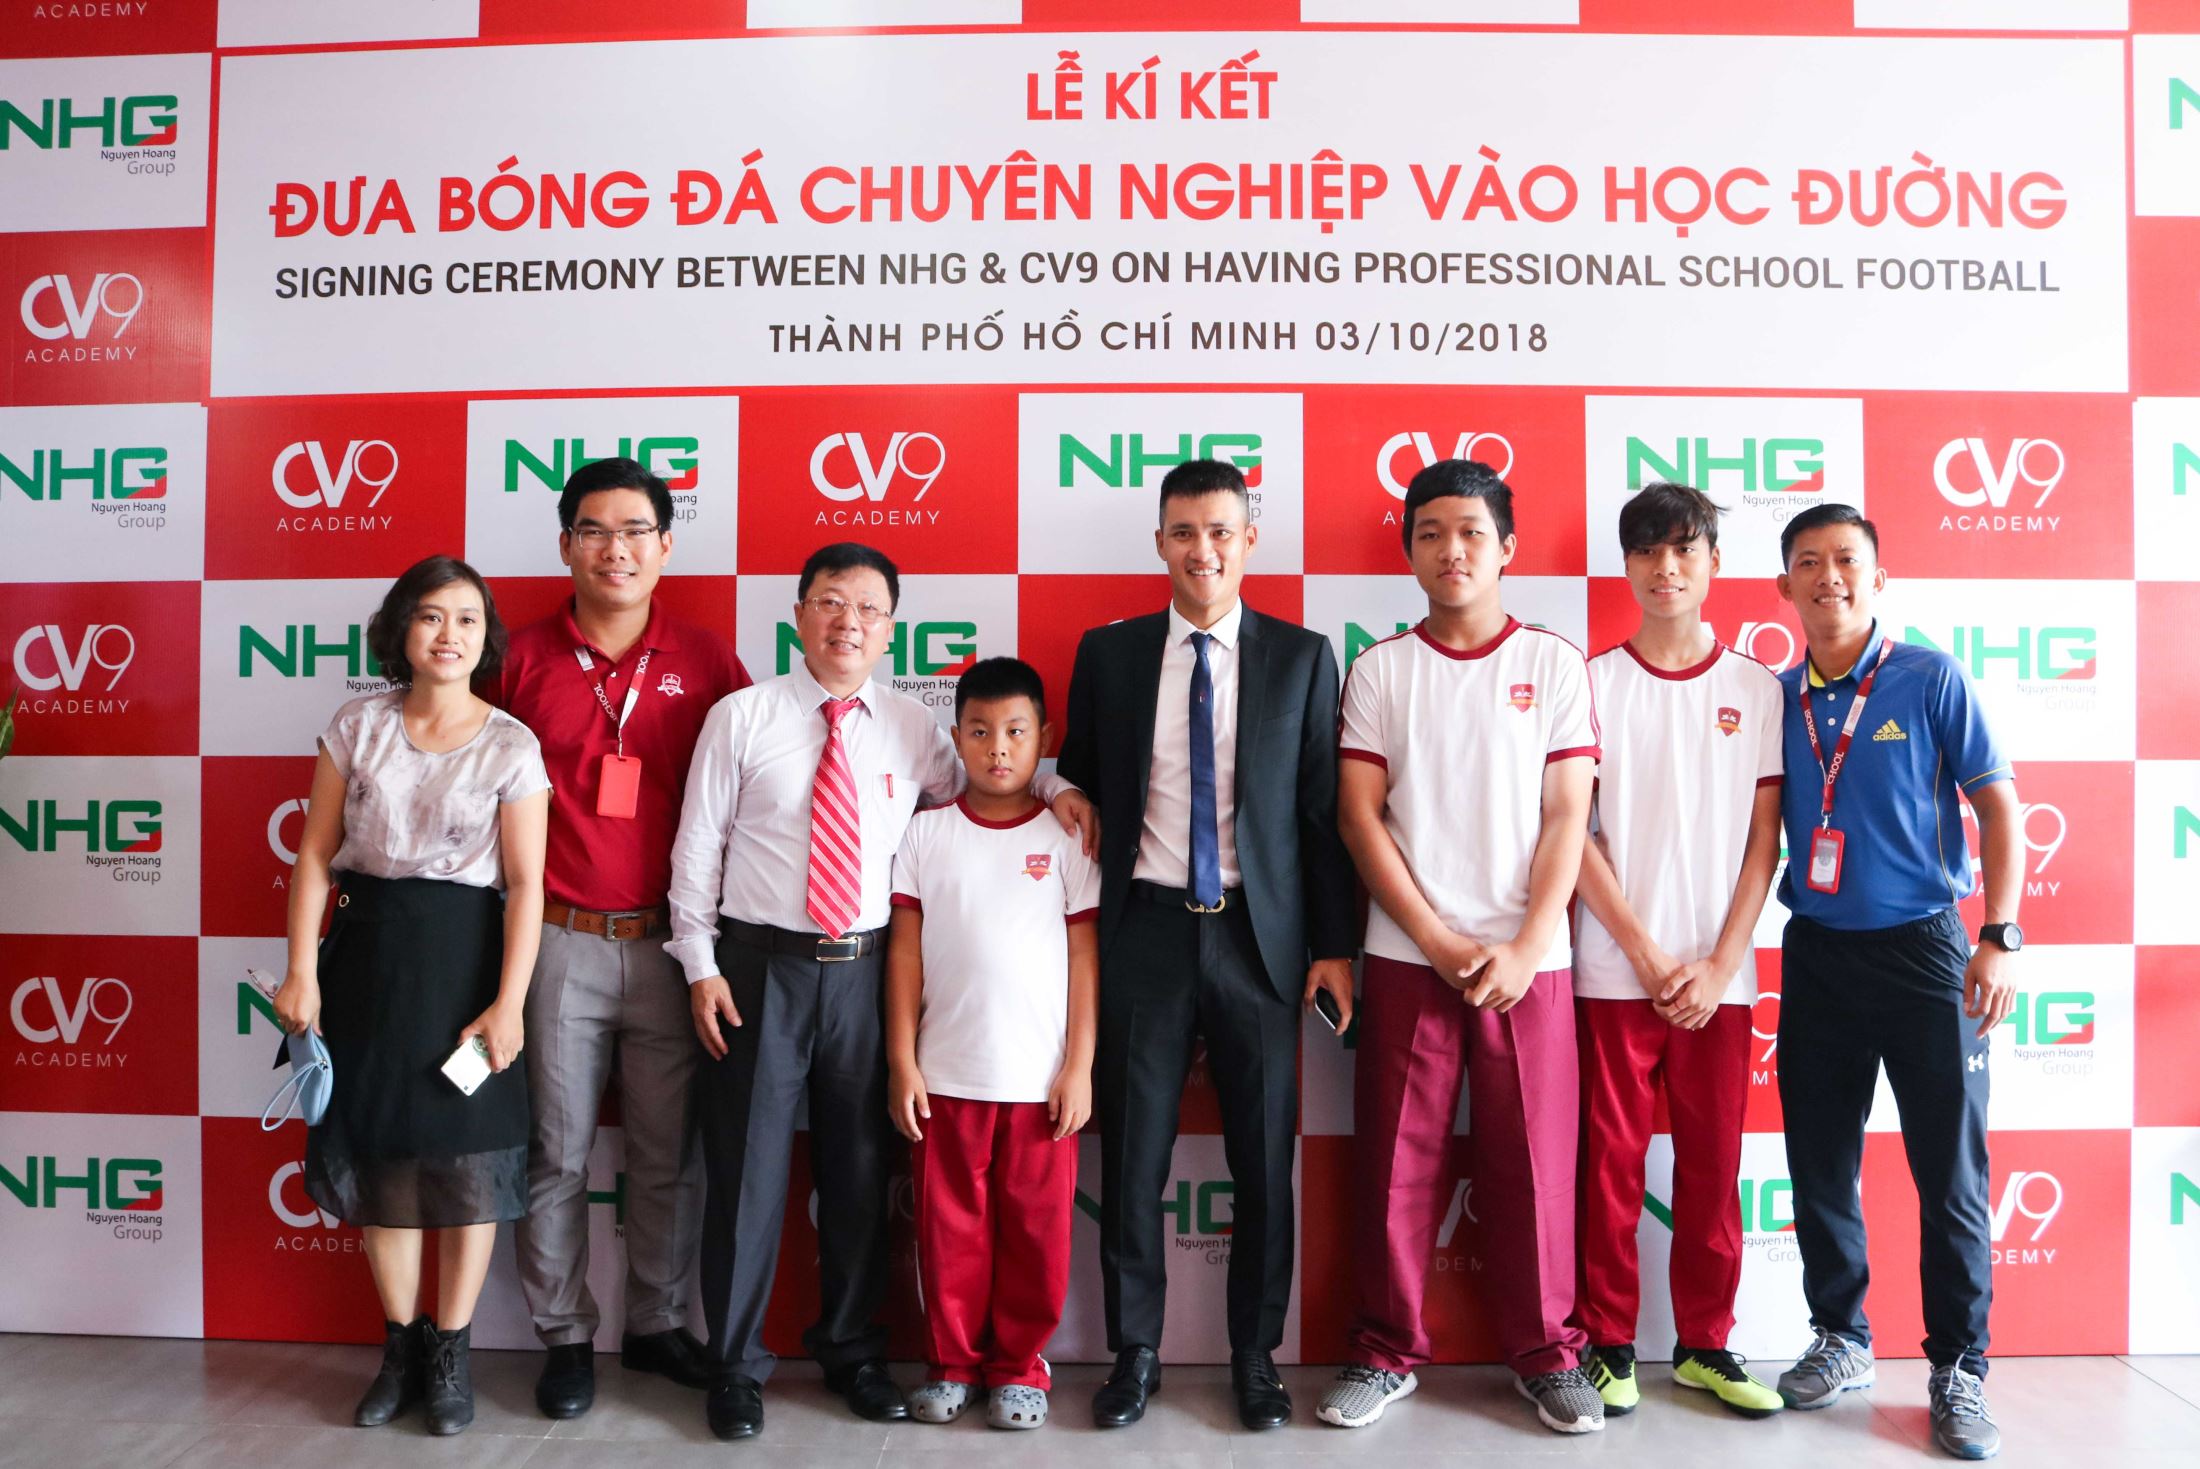 Mr. Le Cong Vinh and students of iSchool take photo together at the Ceremony.